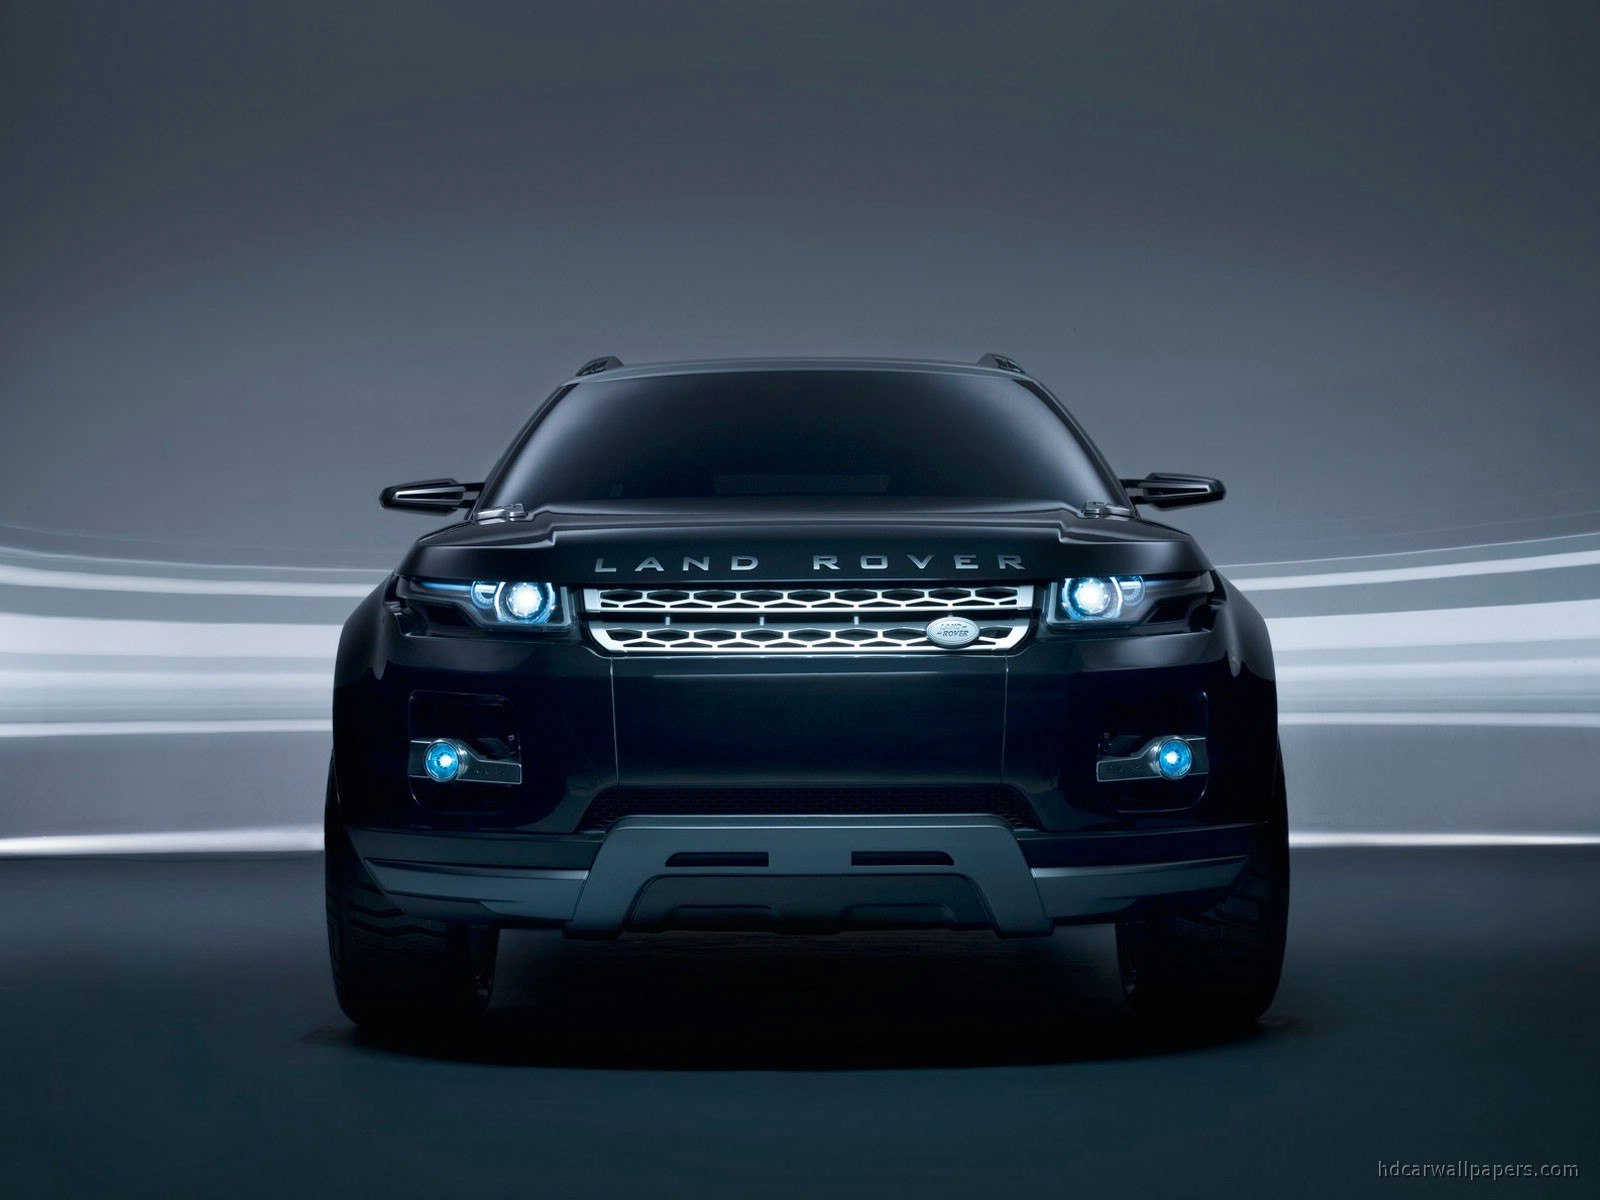 Land Rover Cars Wallpapers